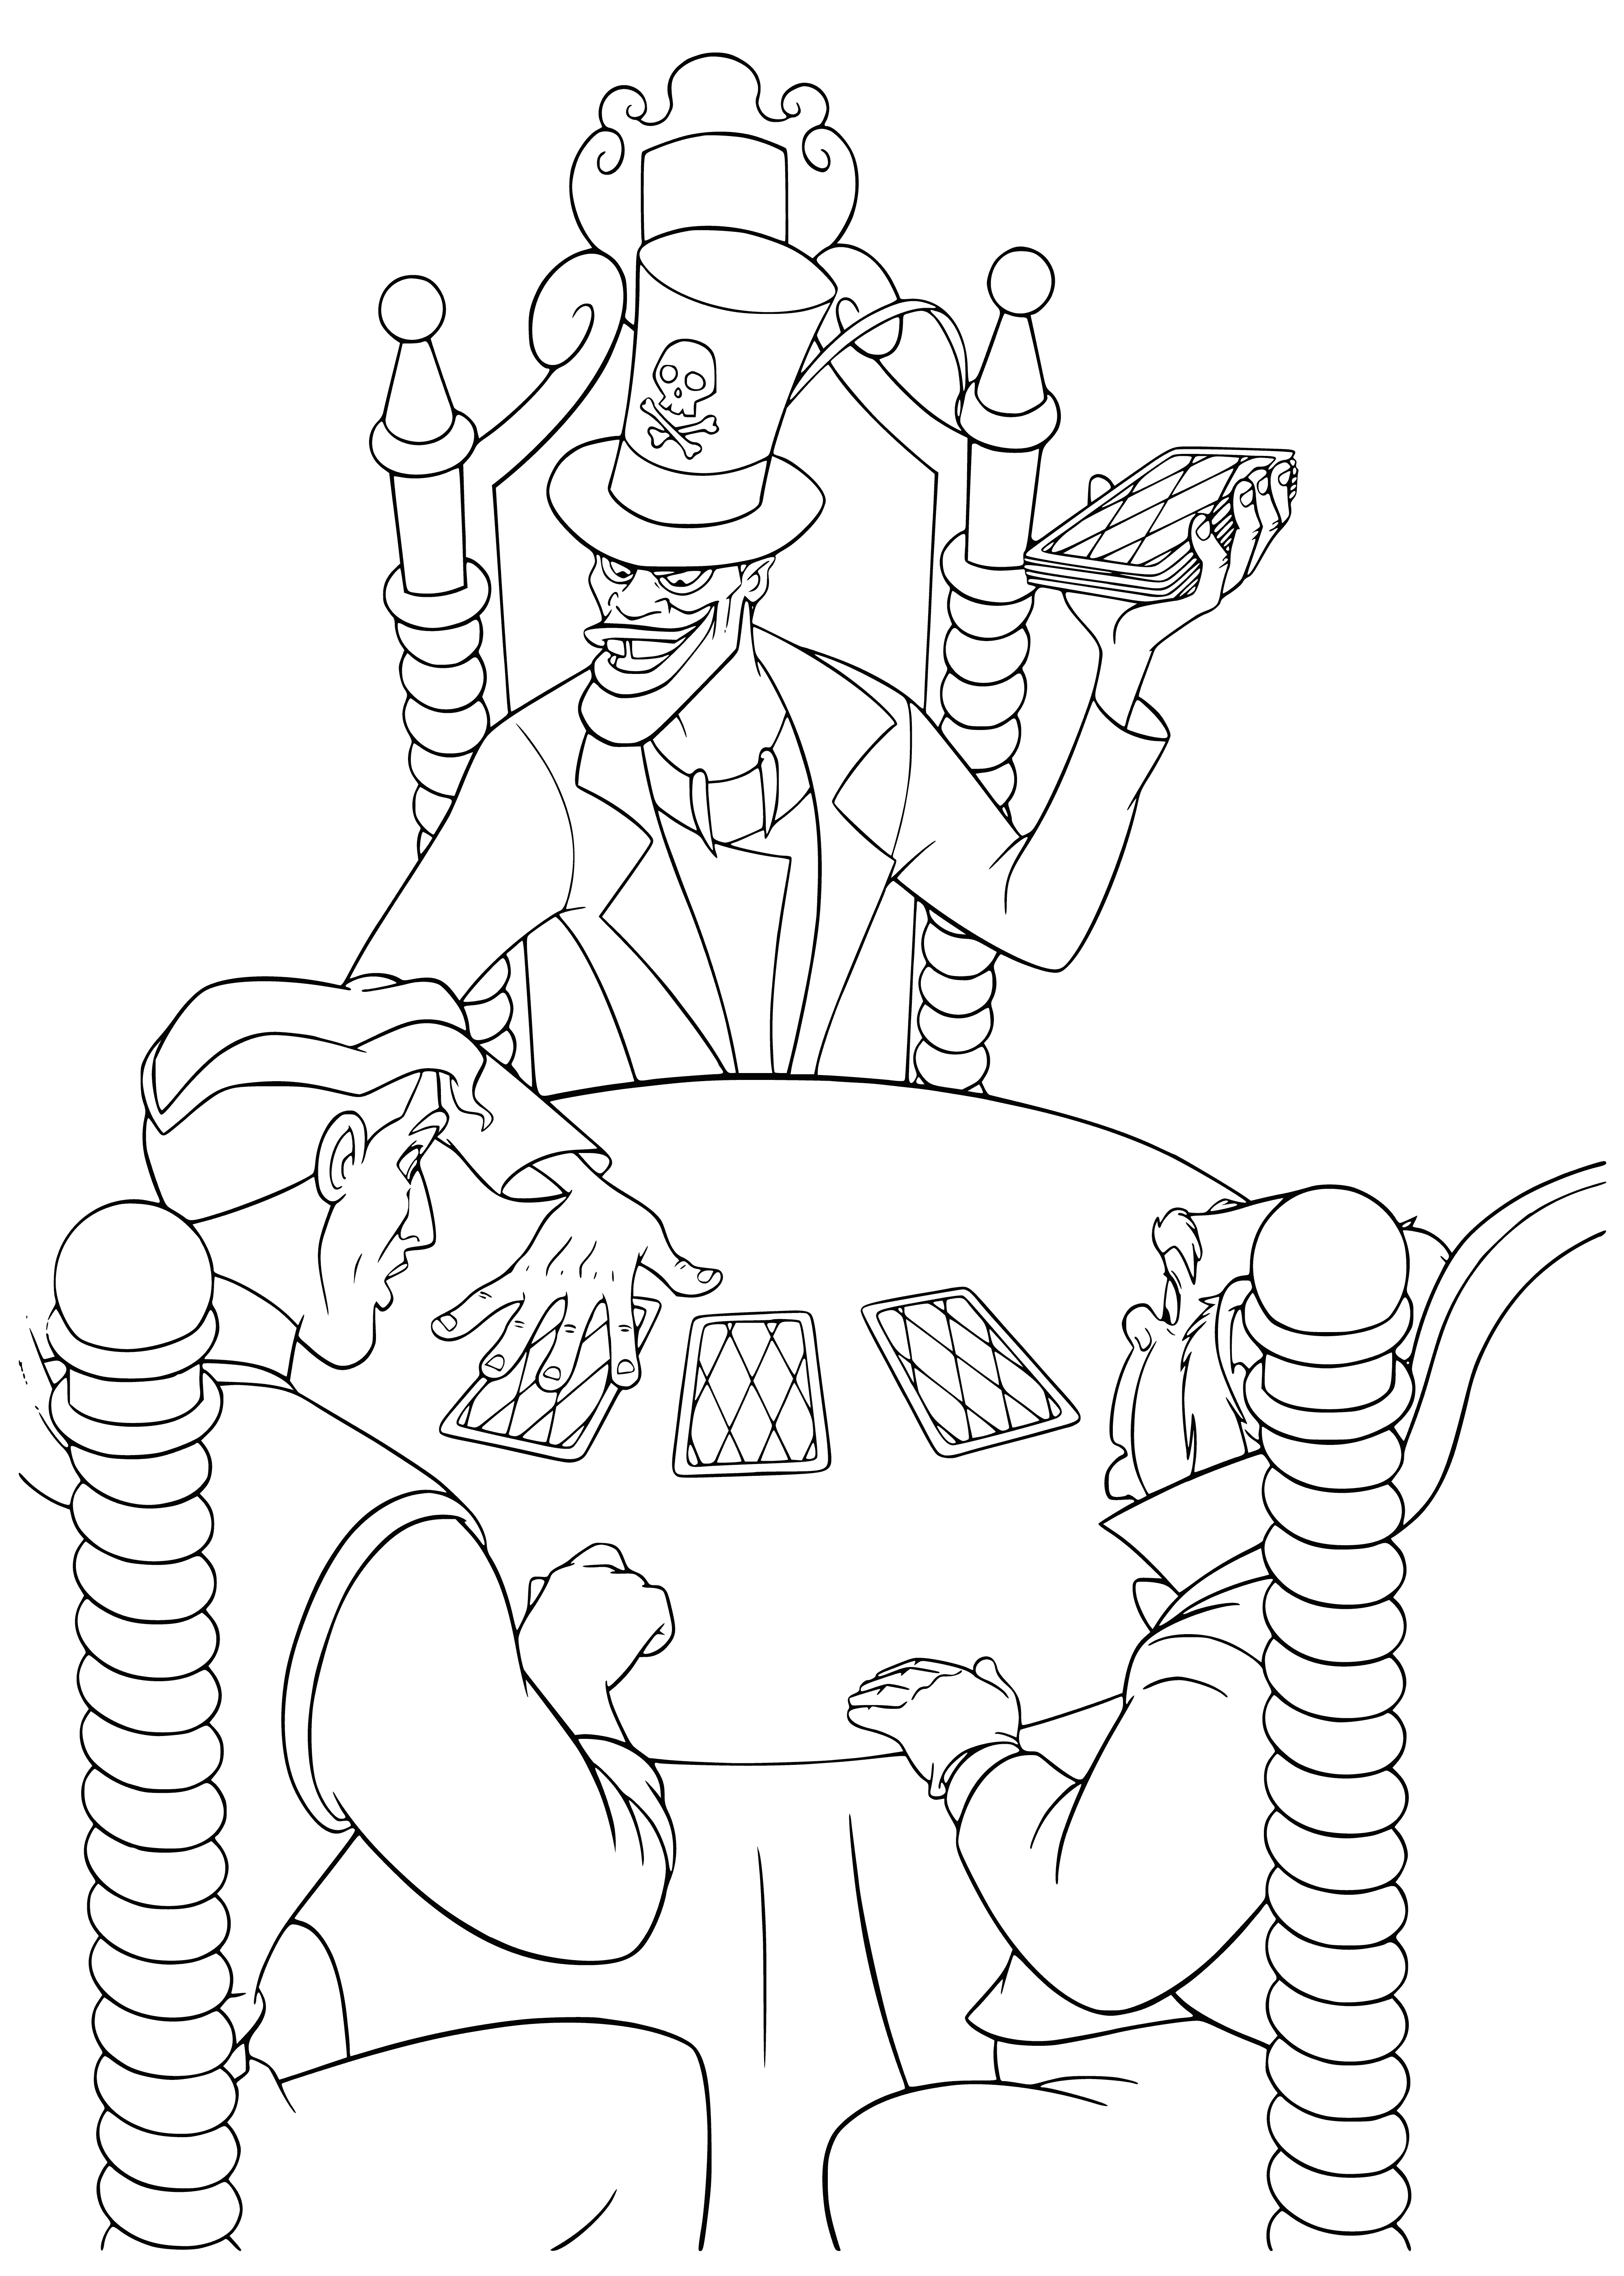 coloring page: Two men, contrasting attire, both sporting gold jewelry, play a game. Behind them is a city skyline.